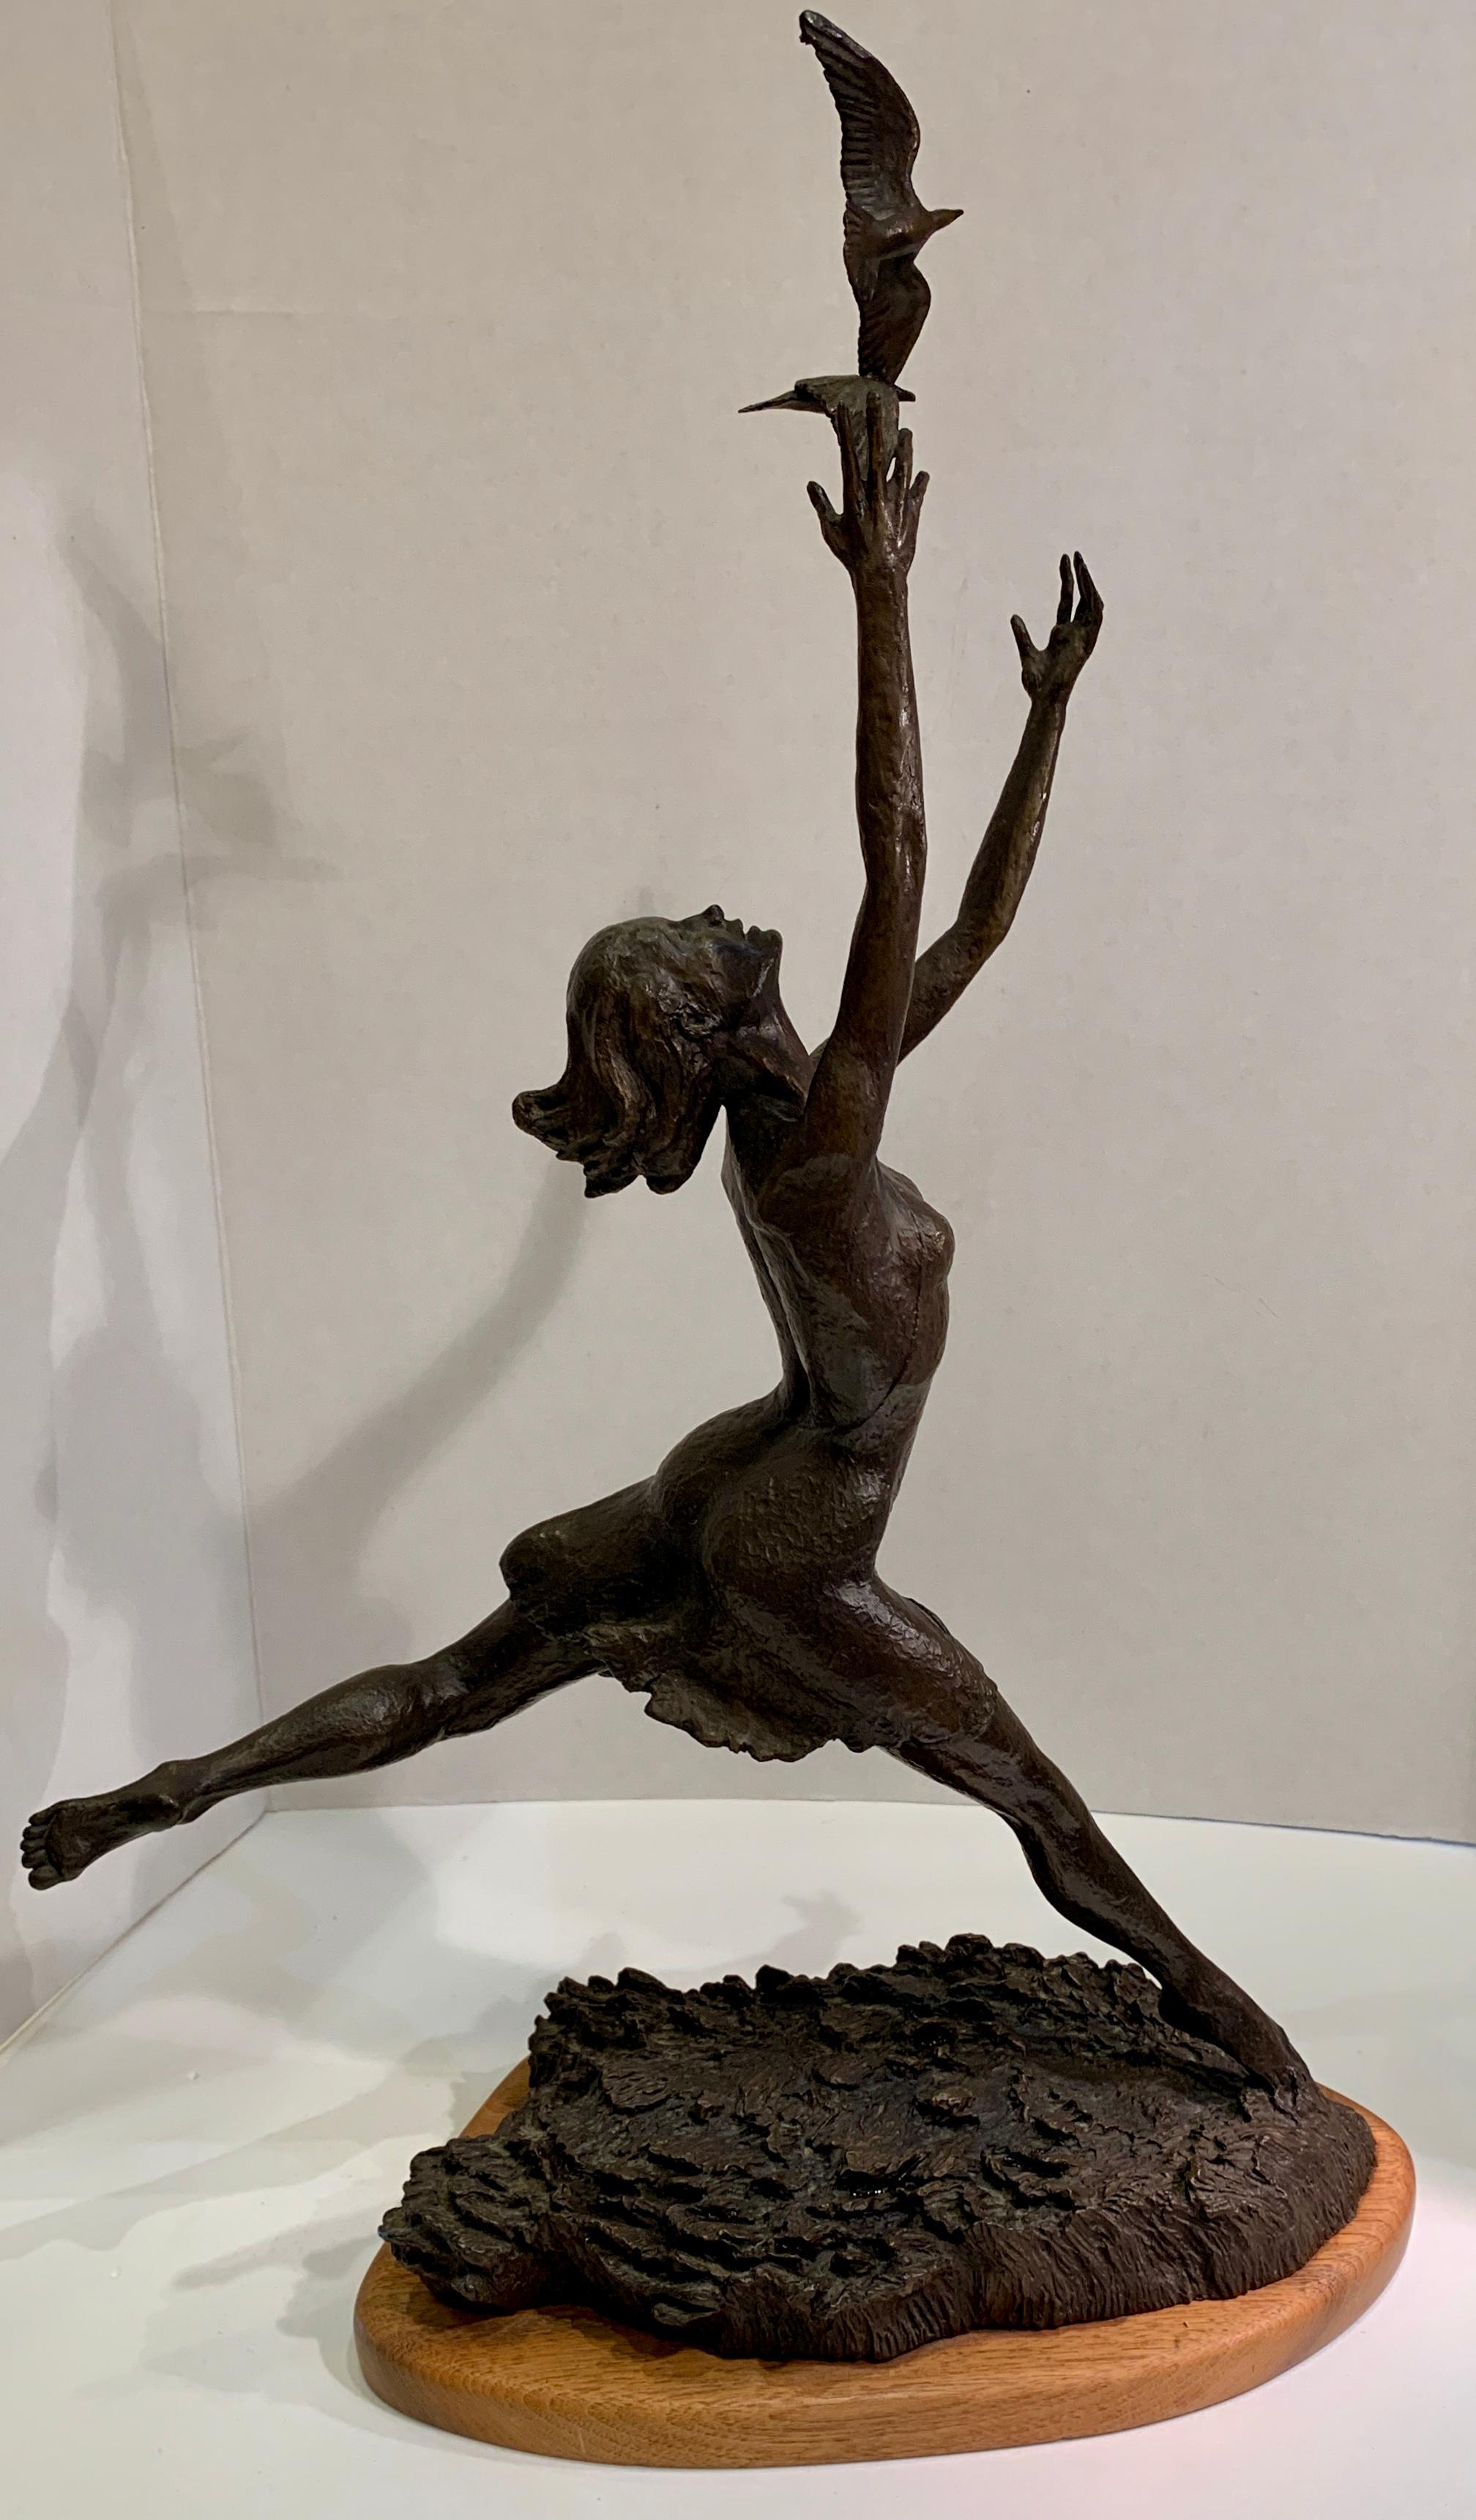 A beautiful and graceful, Art Deco style patinated bronze sculpture of a sinuous, barefoot dancer, with her head thrown back, joyfully leaping into the air with her arms outstretched, her fingertips reaching for and touching a pair of seagulls or